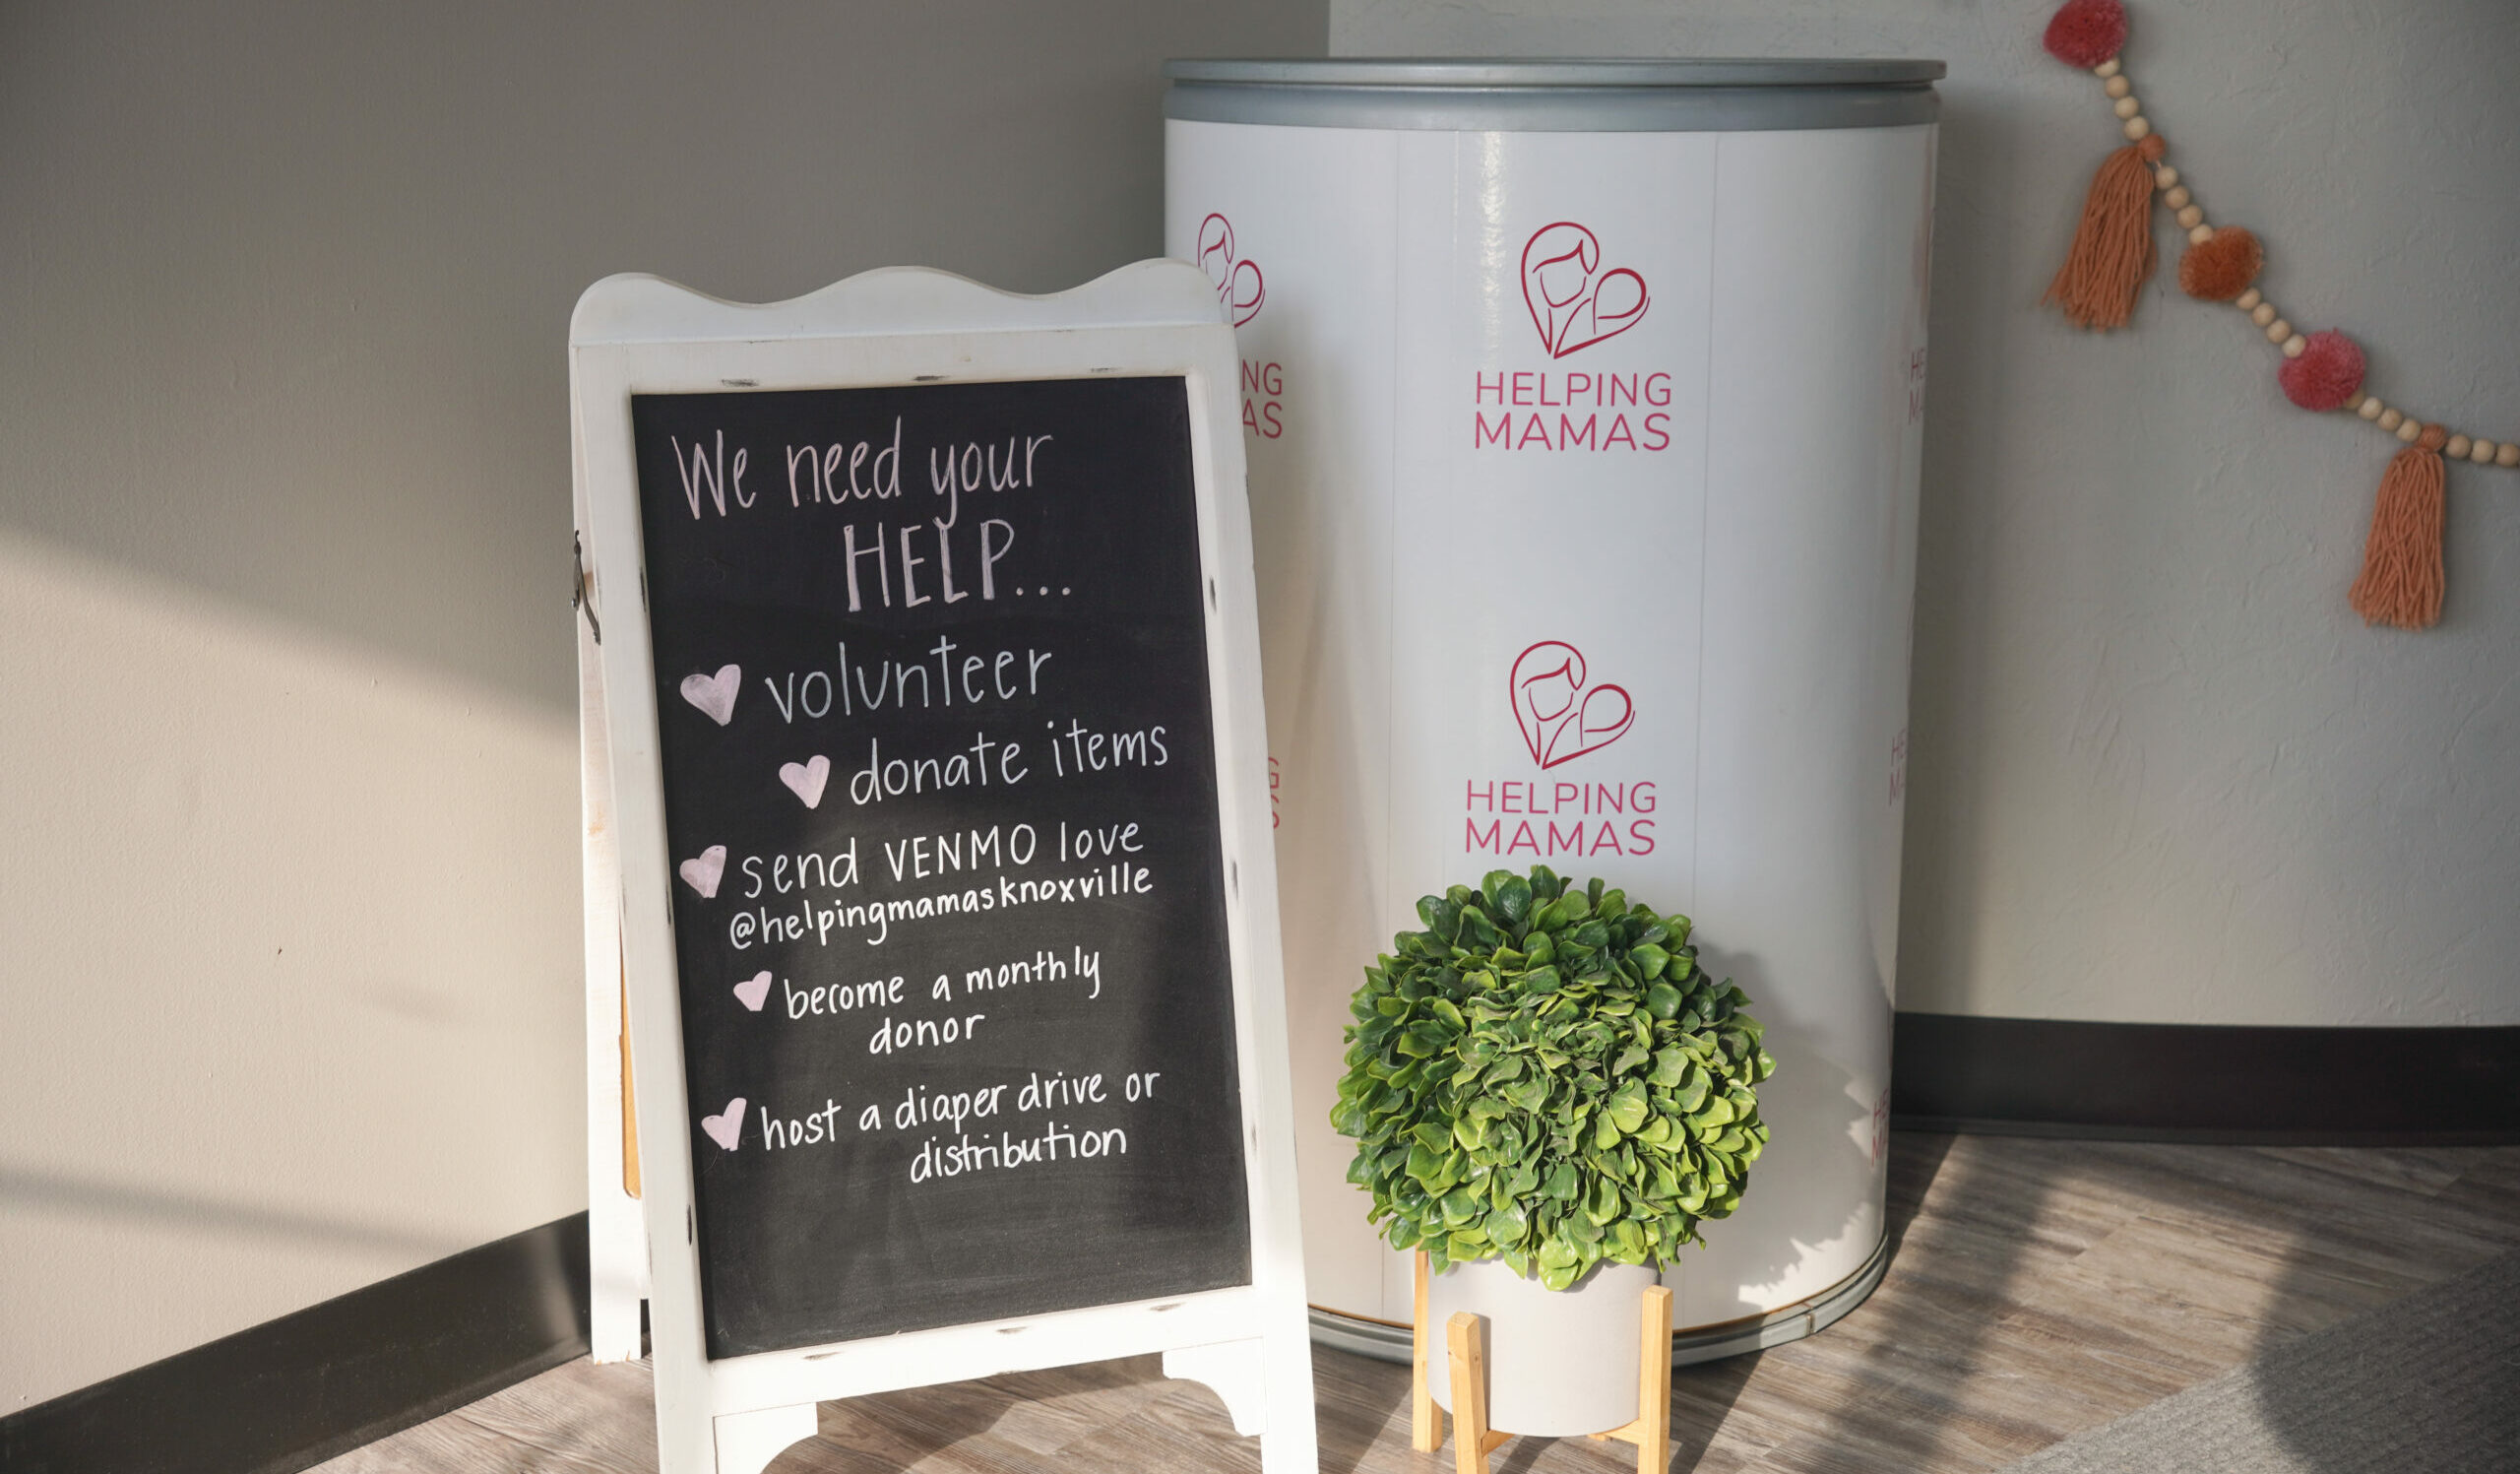 Donation Bin and Sign for Helping Mamas